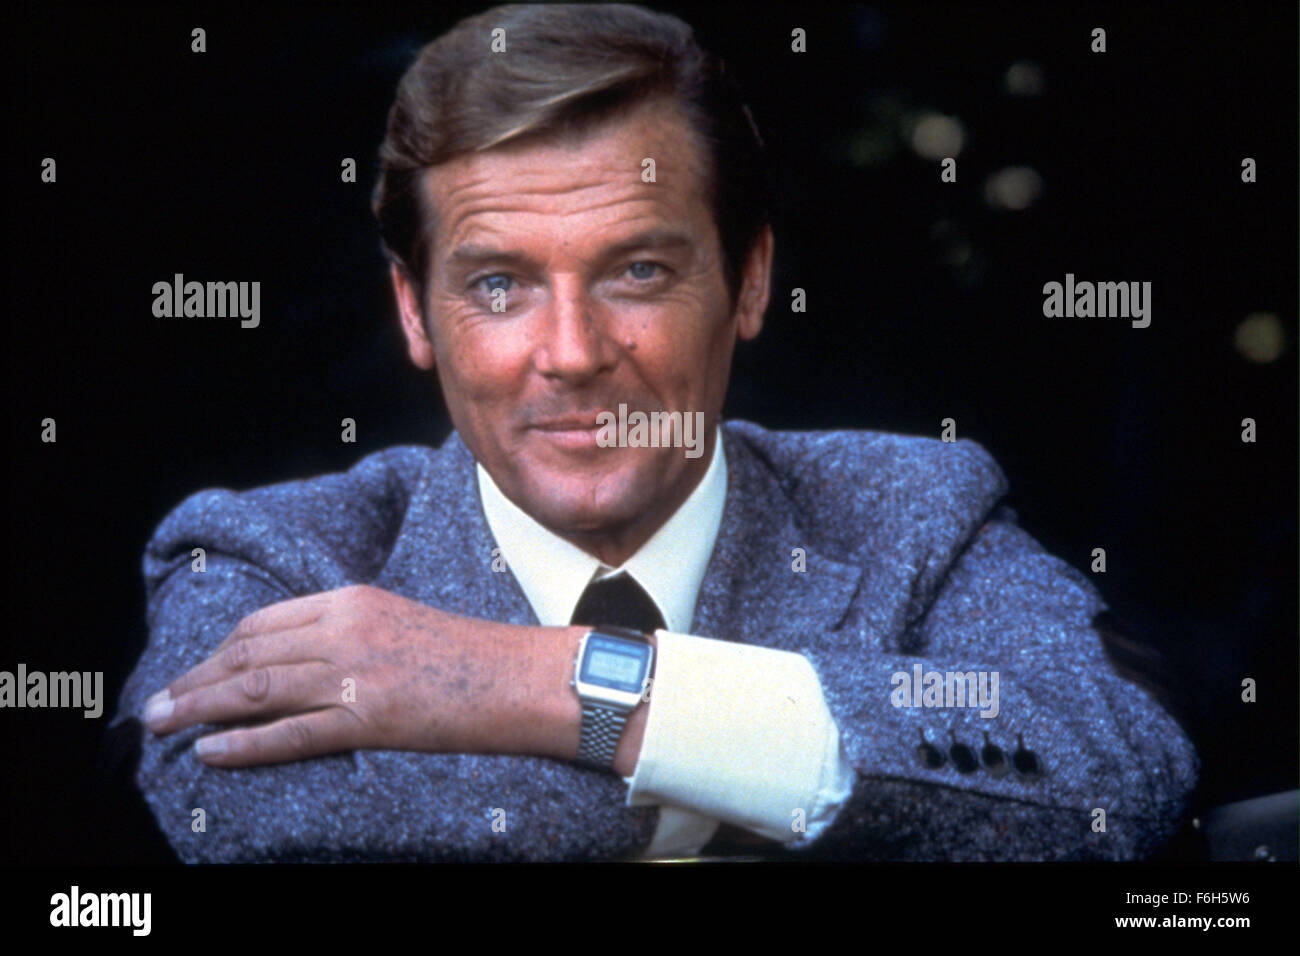 RELEASE DATE: June 29, 1979 MOVIE TITLE: Moonraker STUDIO: MGM/UA PLOT: James Bond investigates the mid-air theft of a space shuttle and discovers a plot to commit global genocide. PICTURED: ROGER MOORE as James Bond. Stock Photo